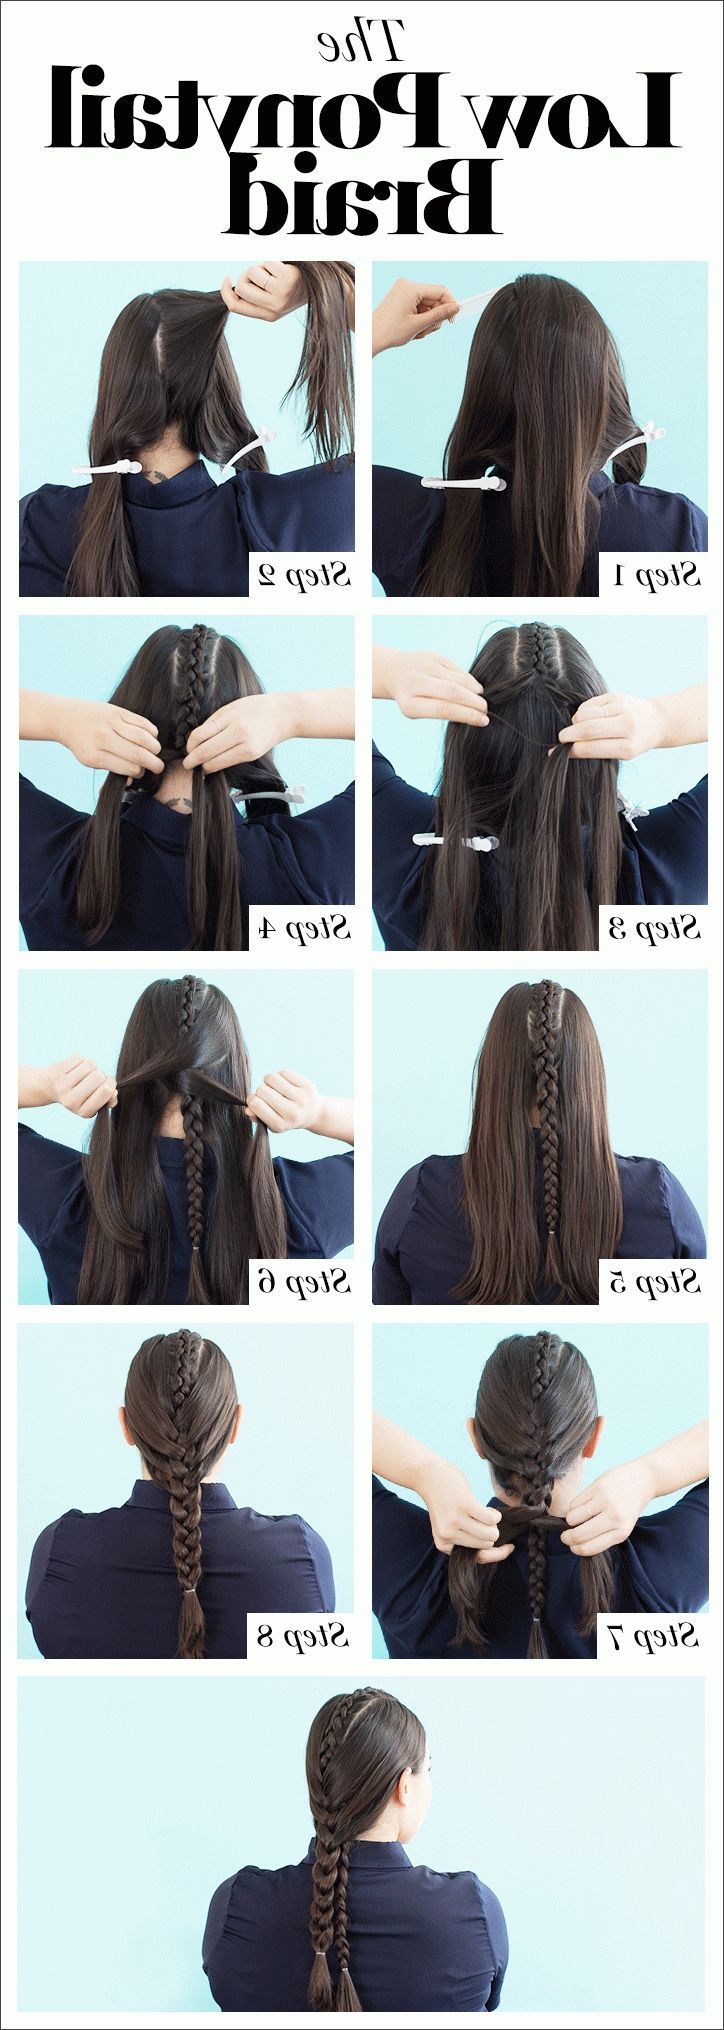 Most Recent Dyed Simple Ponytail Hairstyles For Second Day Hair Inside How To Braid Hair: 8 Cute Diy Hairstyles For Every Hair Type (View 16 of 20)